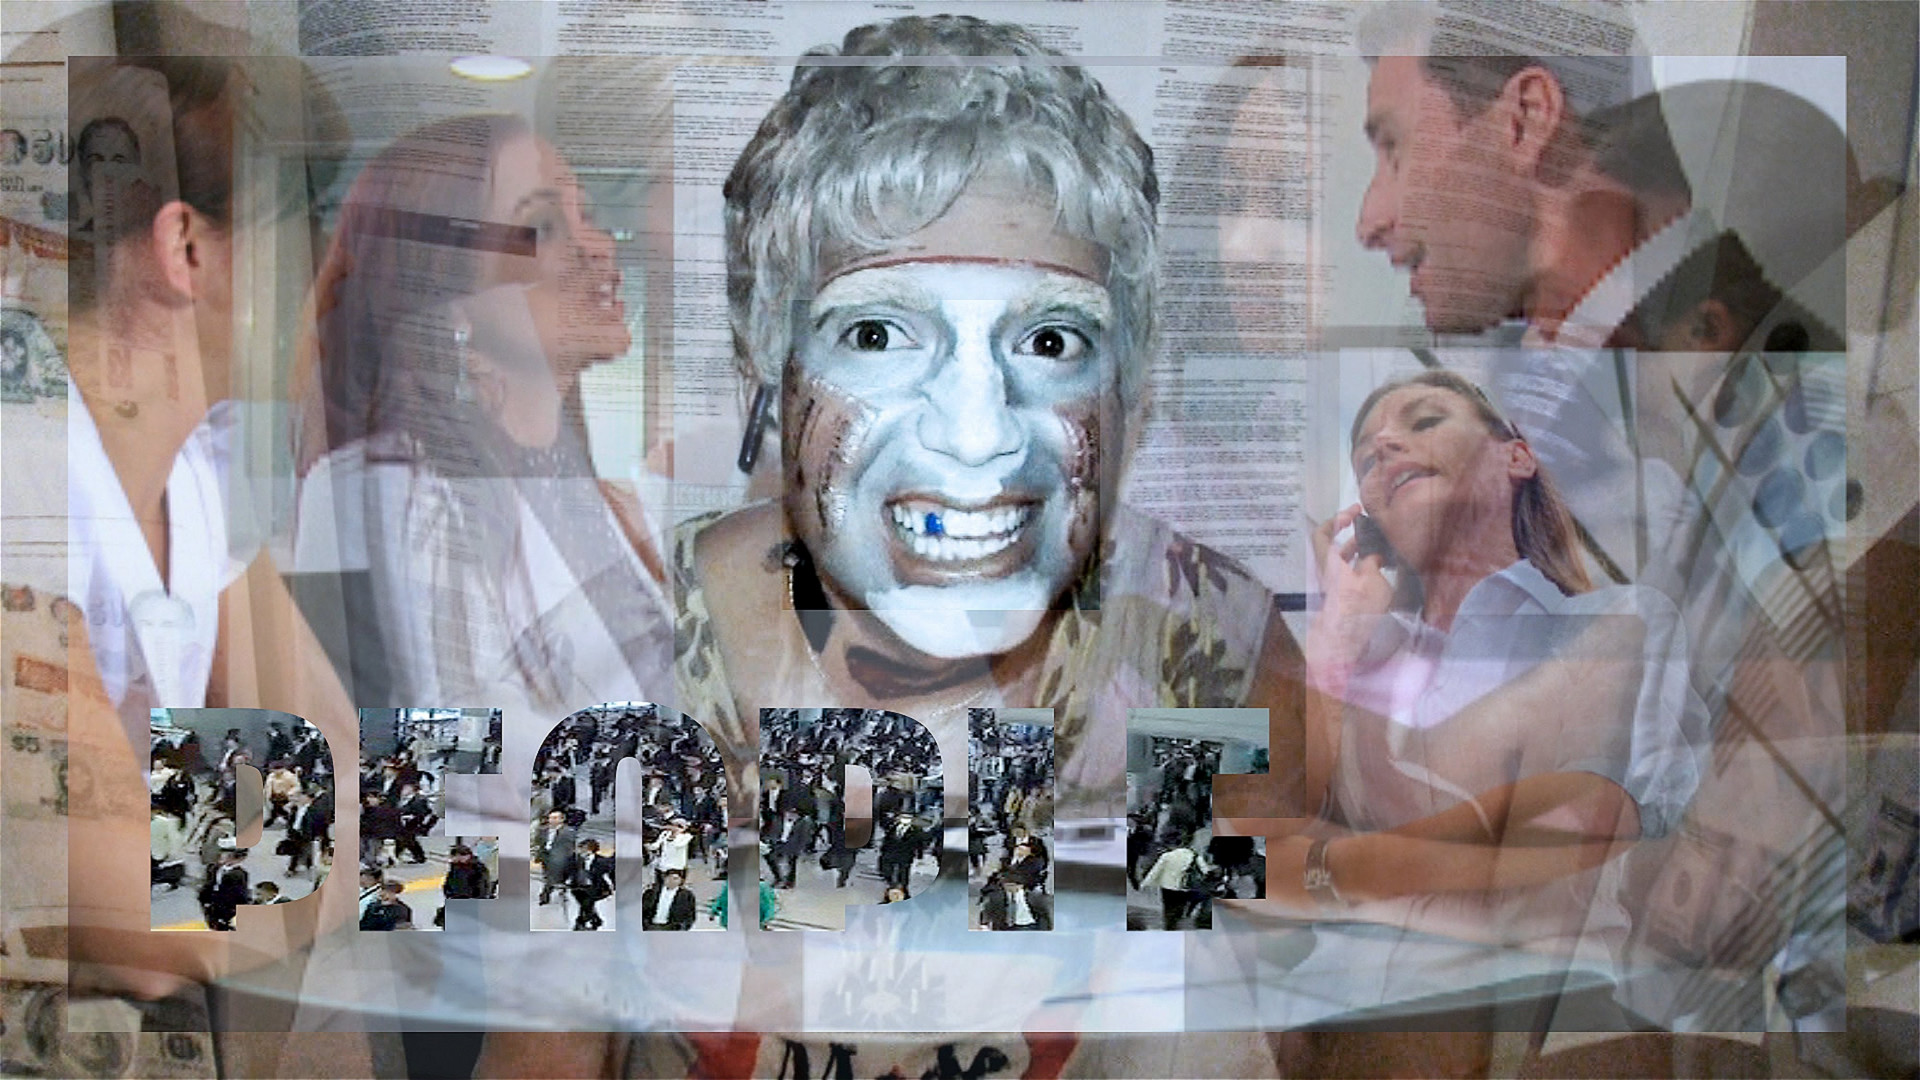 A digital image of a person wearing a gray wig and white face paint grimacing, collaged among stock photos of buisnesspeople in a meeting